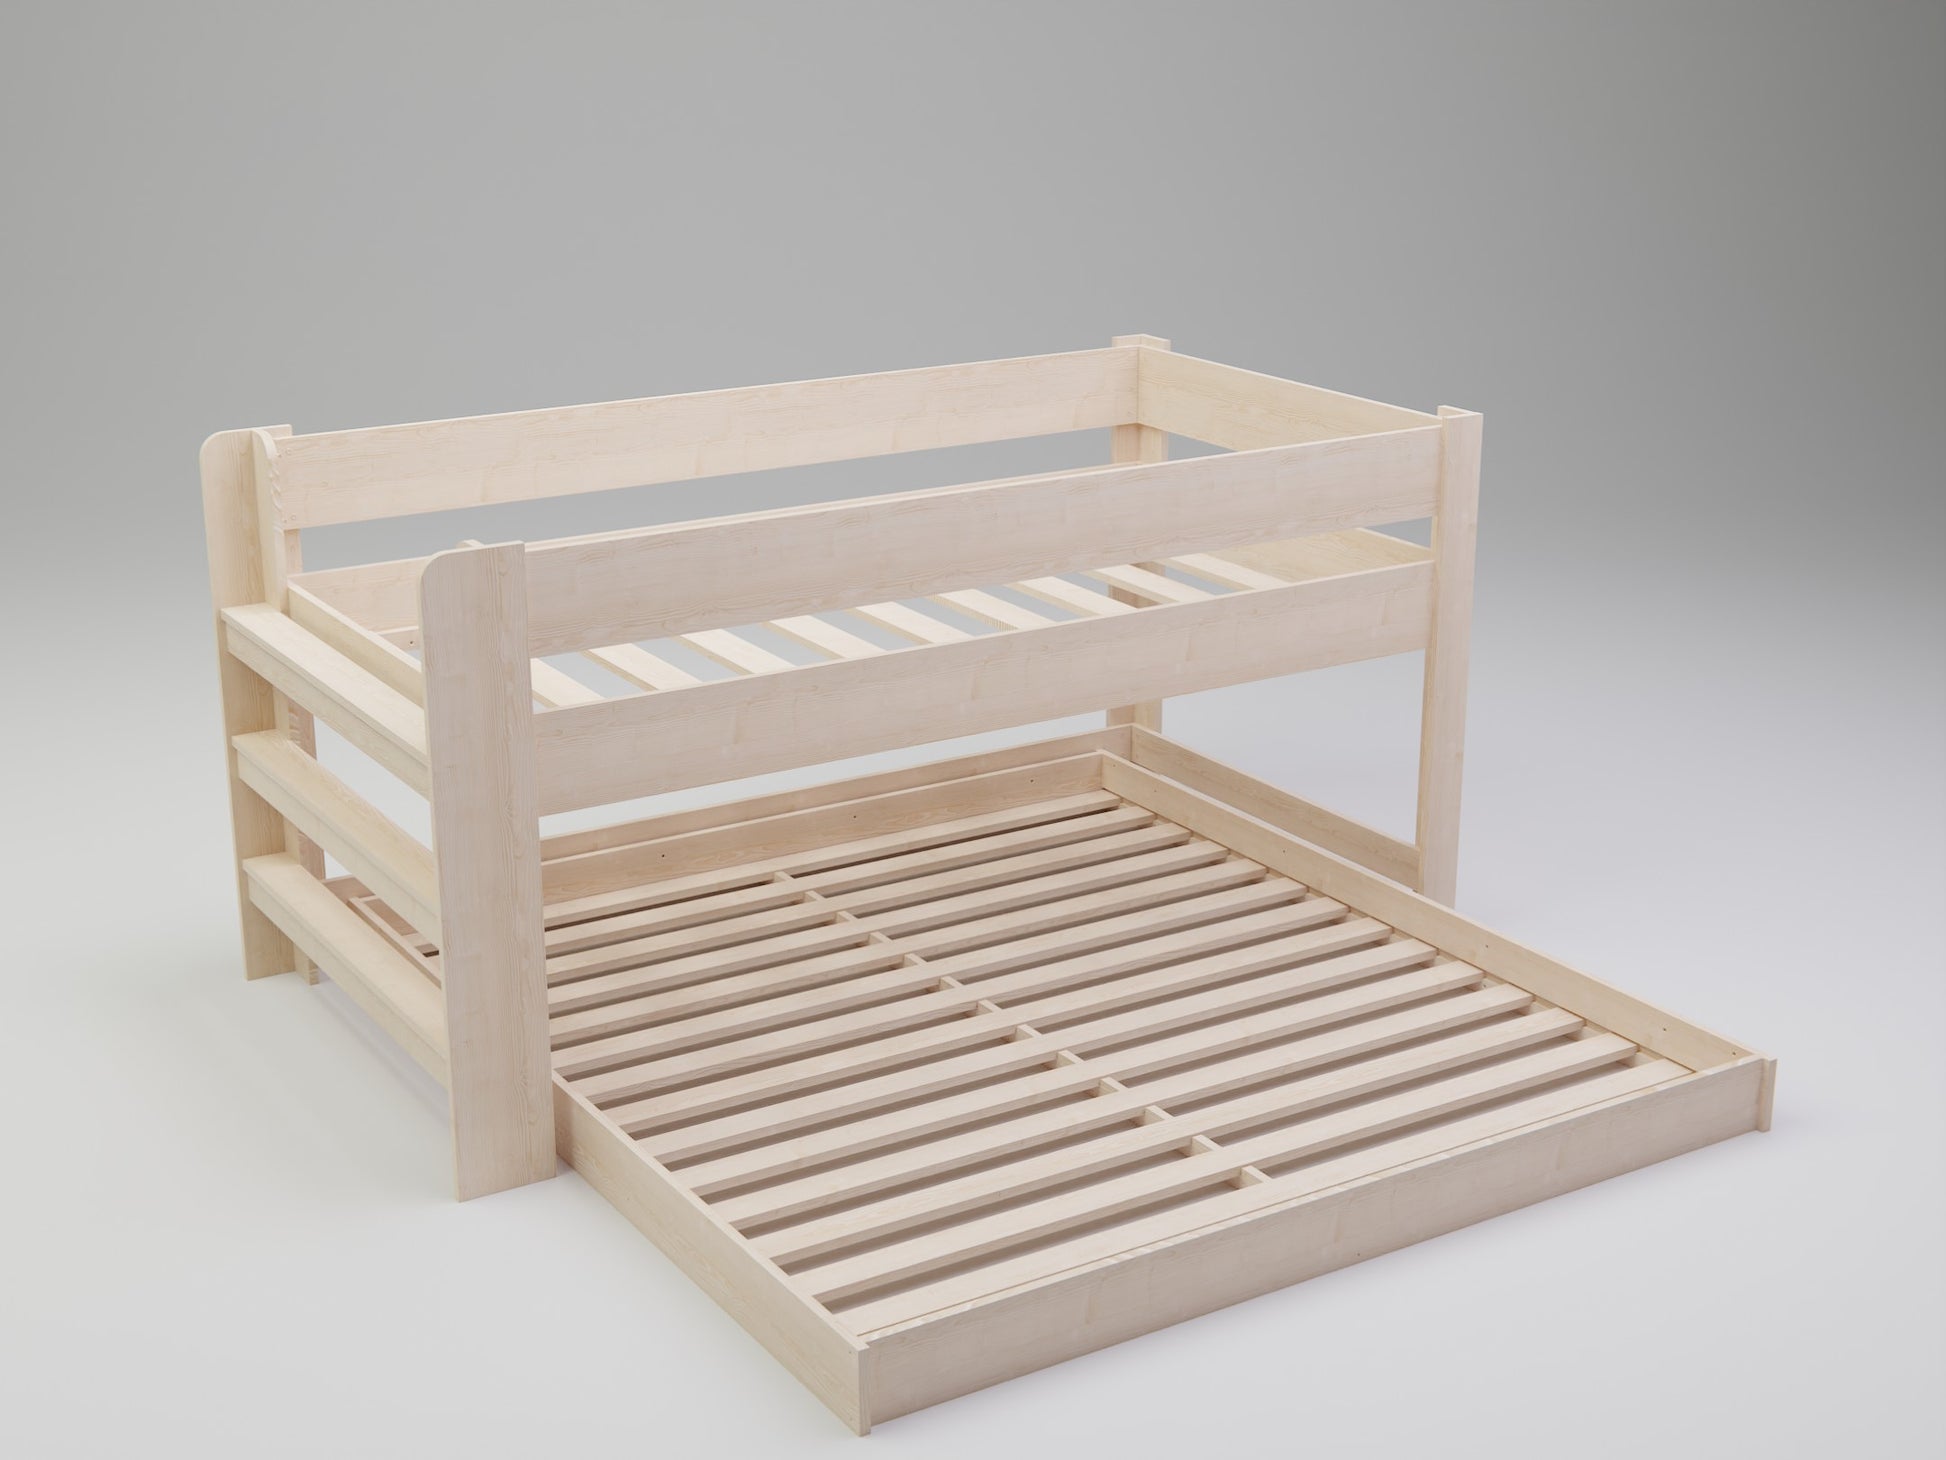 Every sibling bond is special; celebrate it with our L shape bed, tailored for shared comfort.